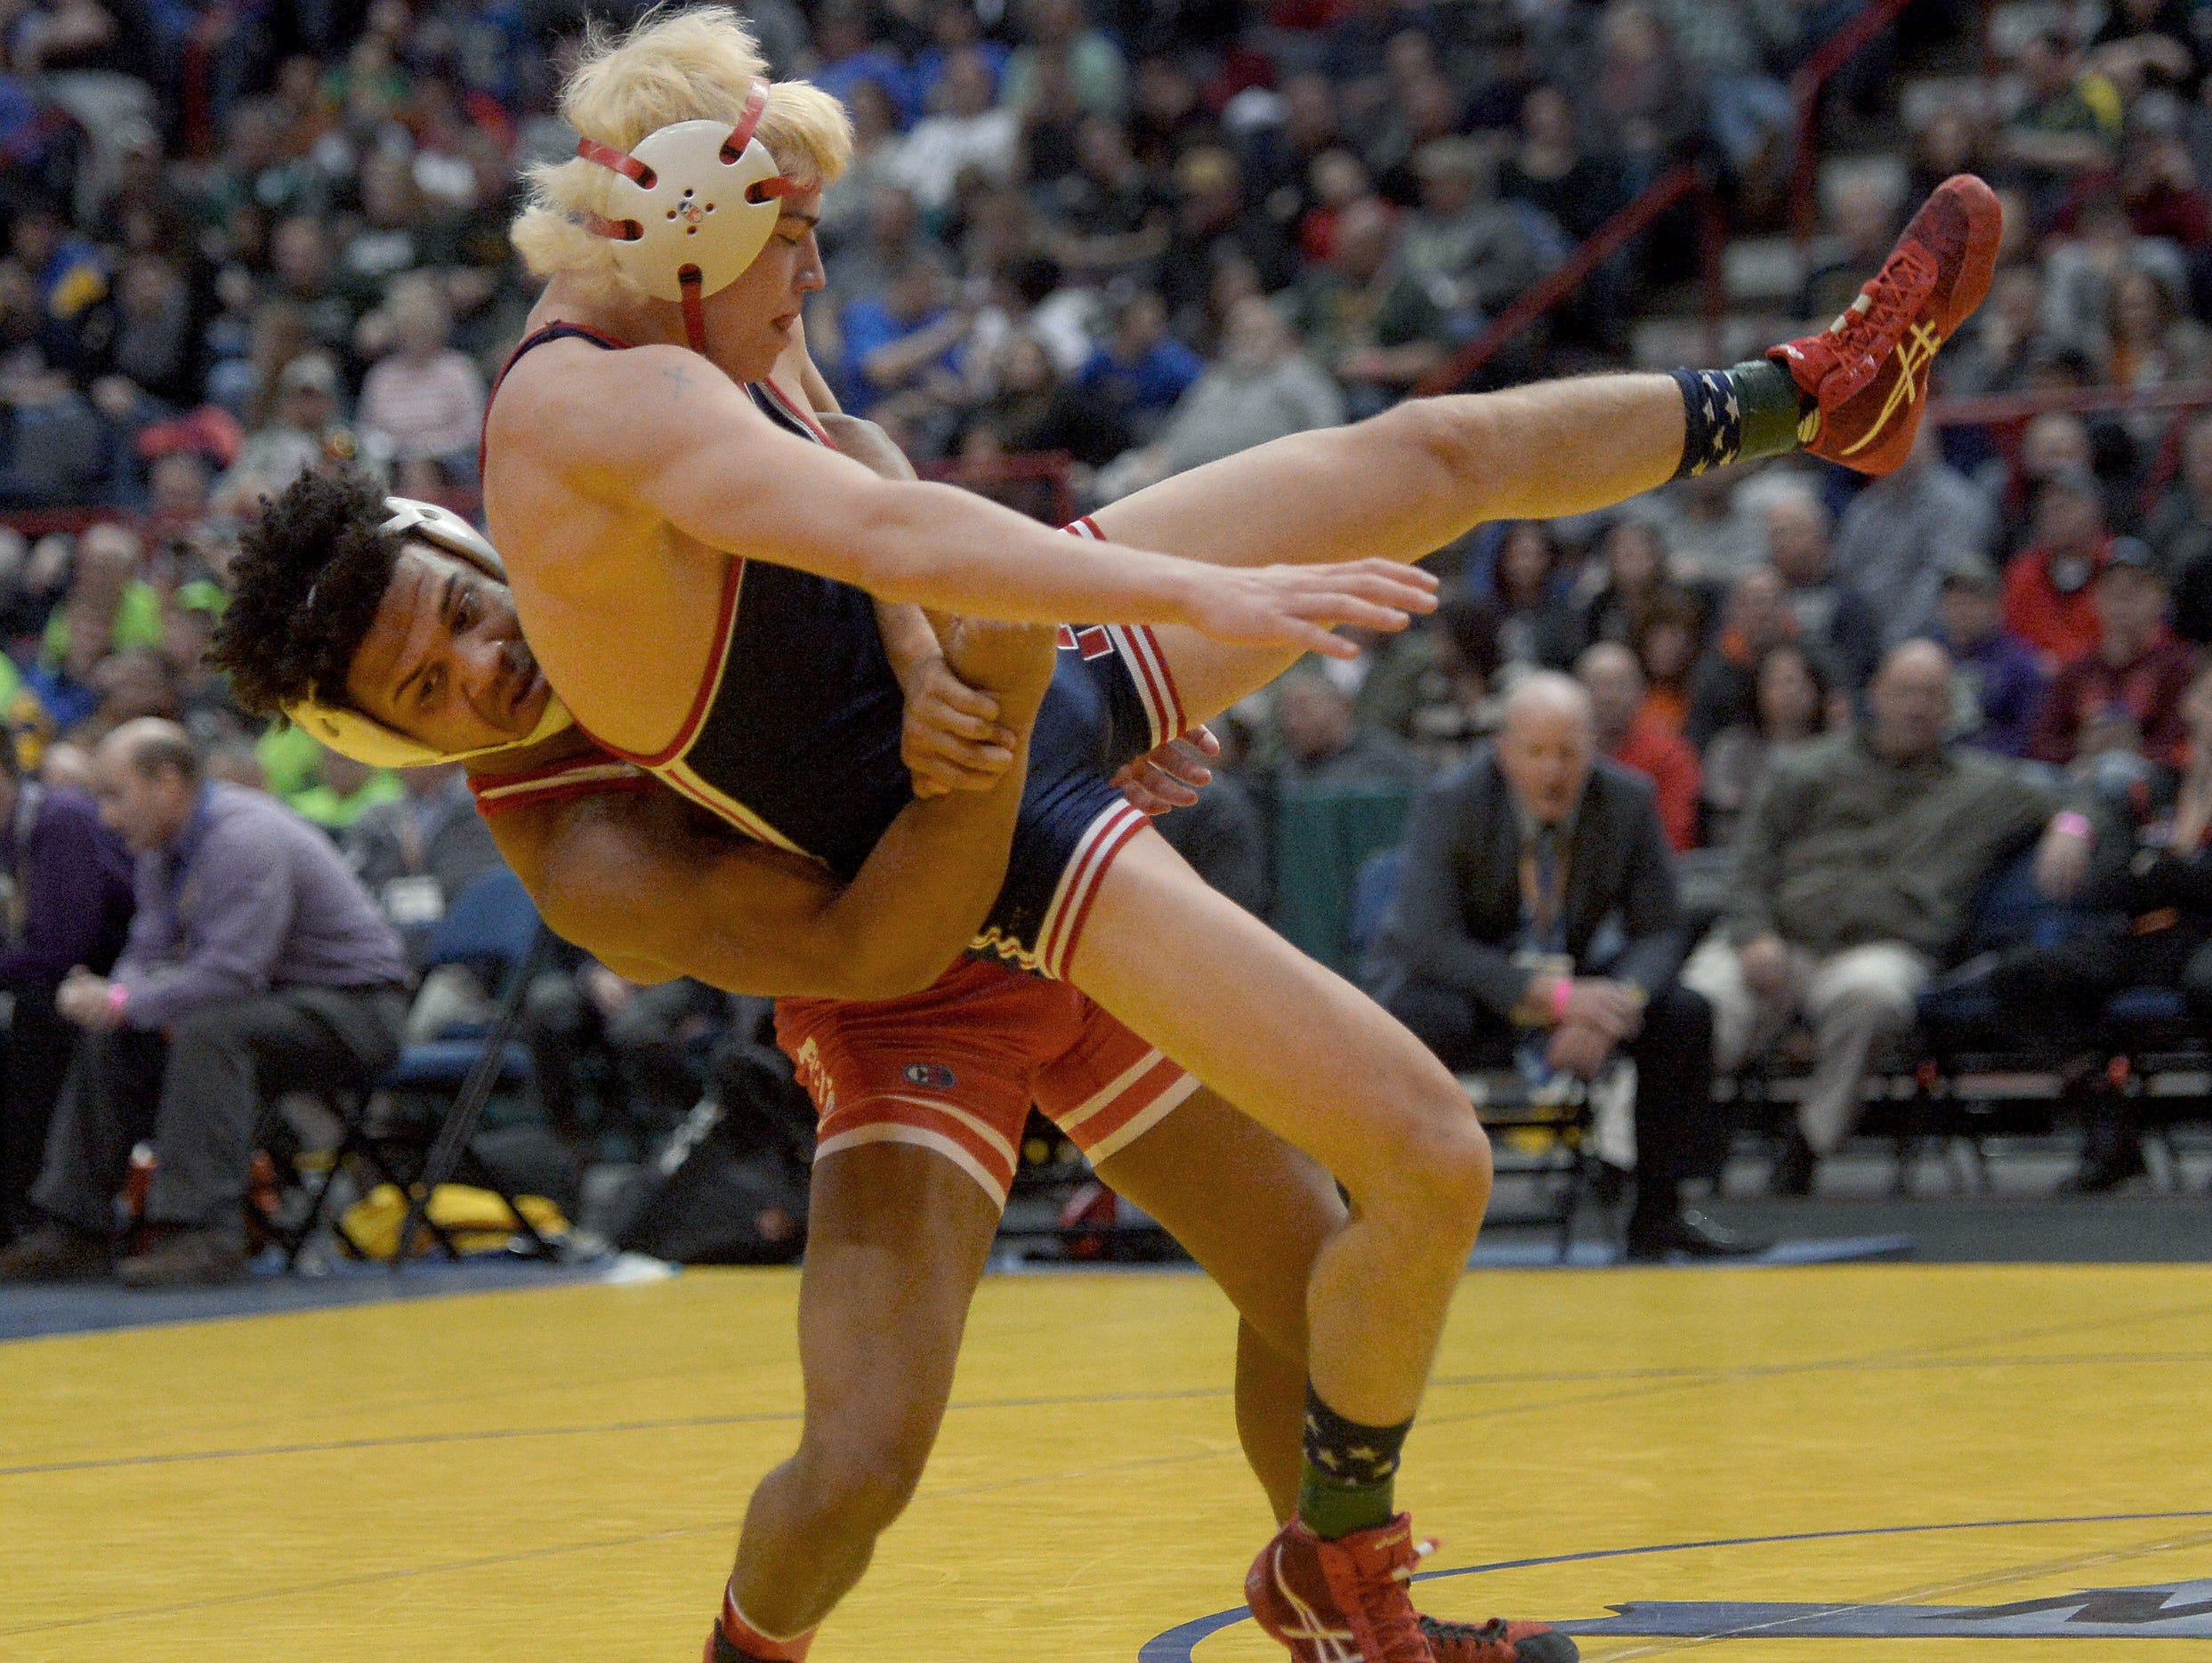 Penfield's Frankie Gissendanner, left, wrestles against North Tonawanda's Troy Keller in the finals of the 145-pound class (Division 1).